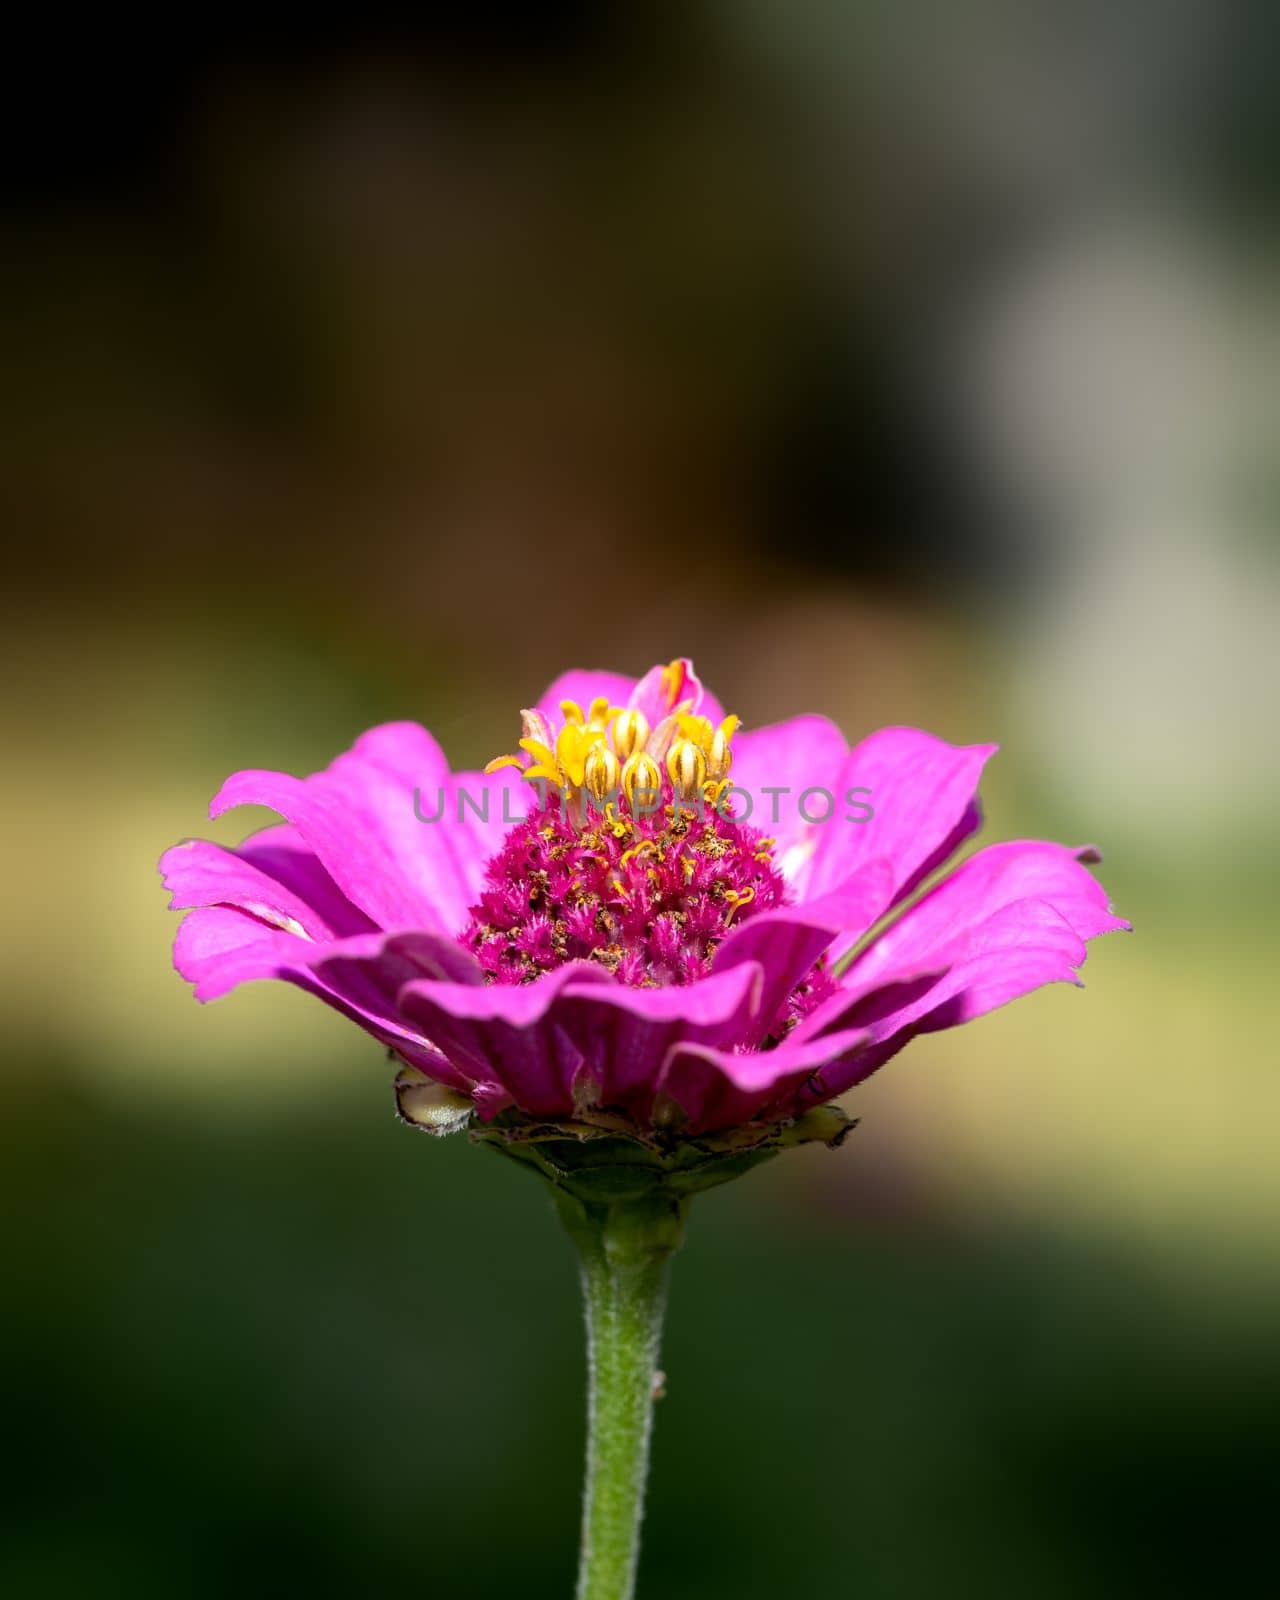 Vibrant pink coloured spring flower, close-up detailed image of a flower